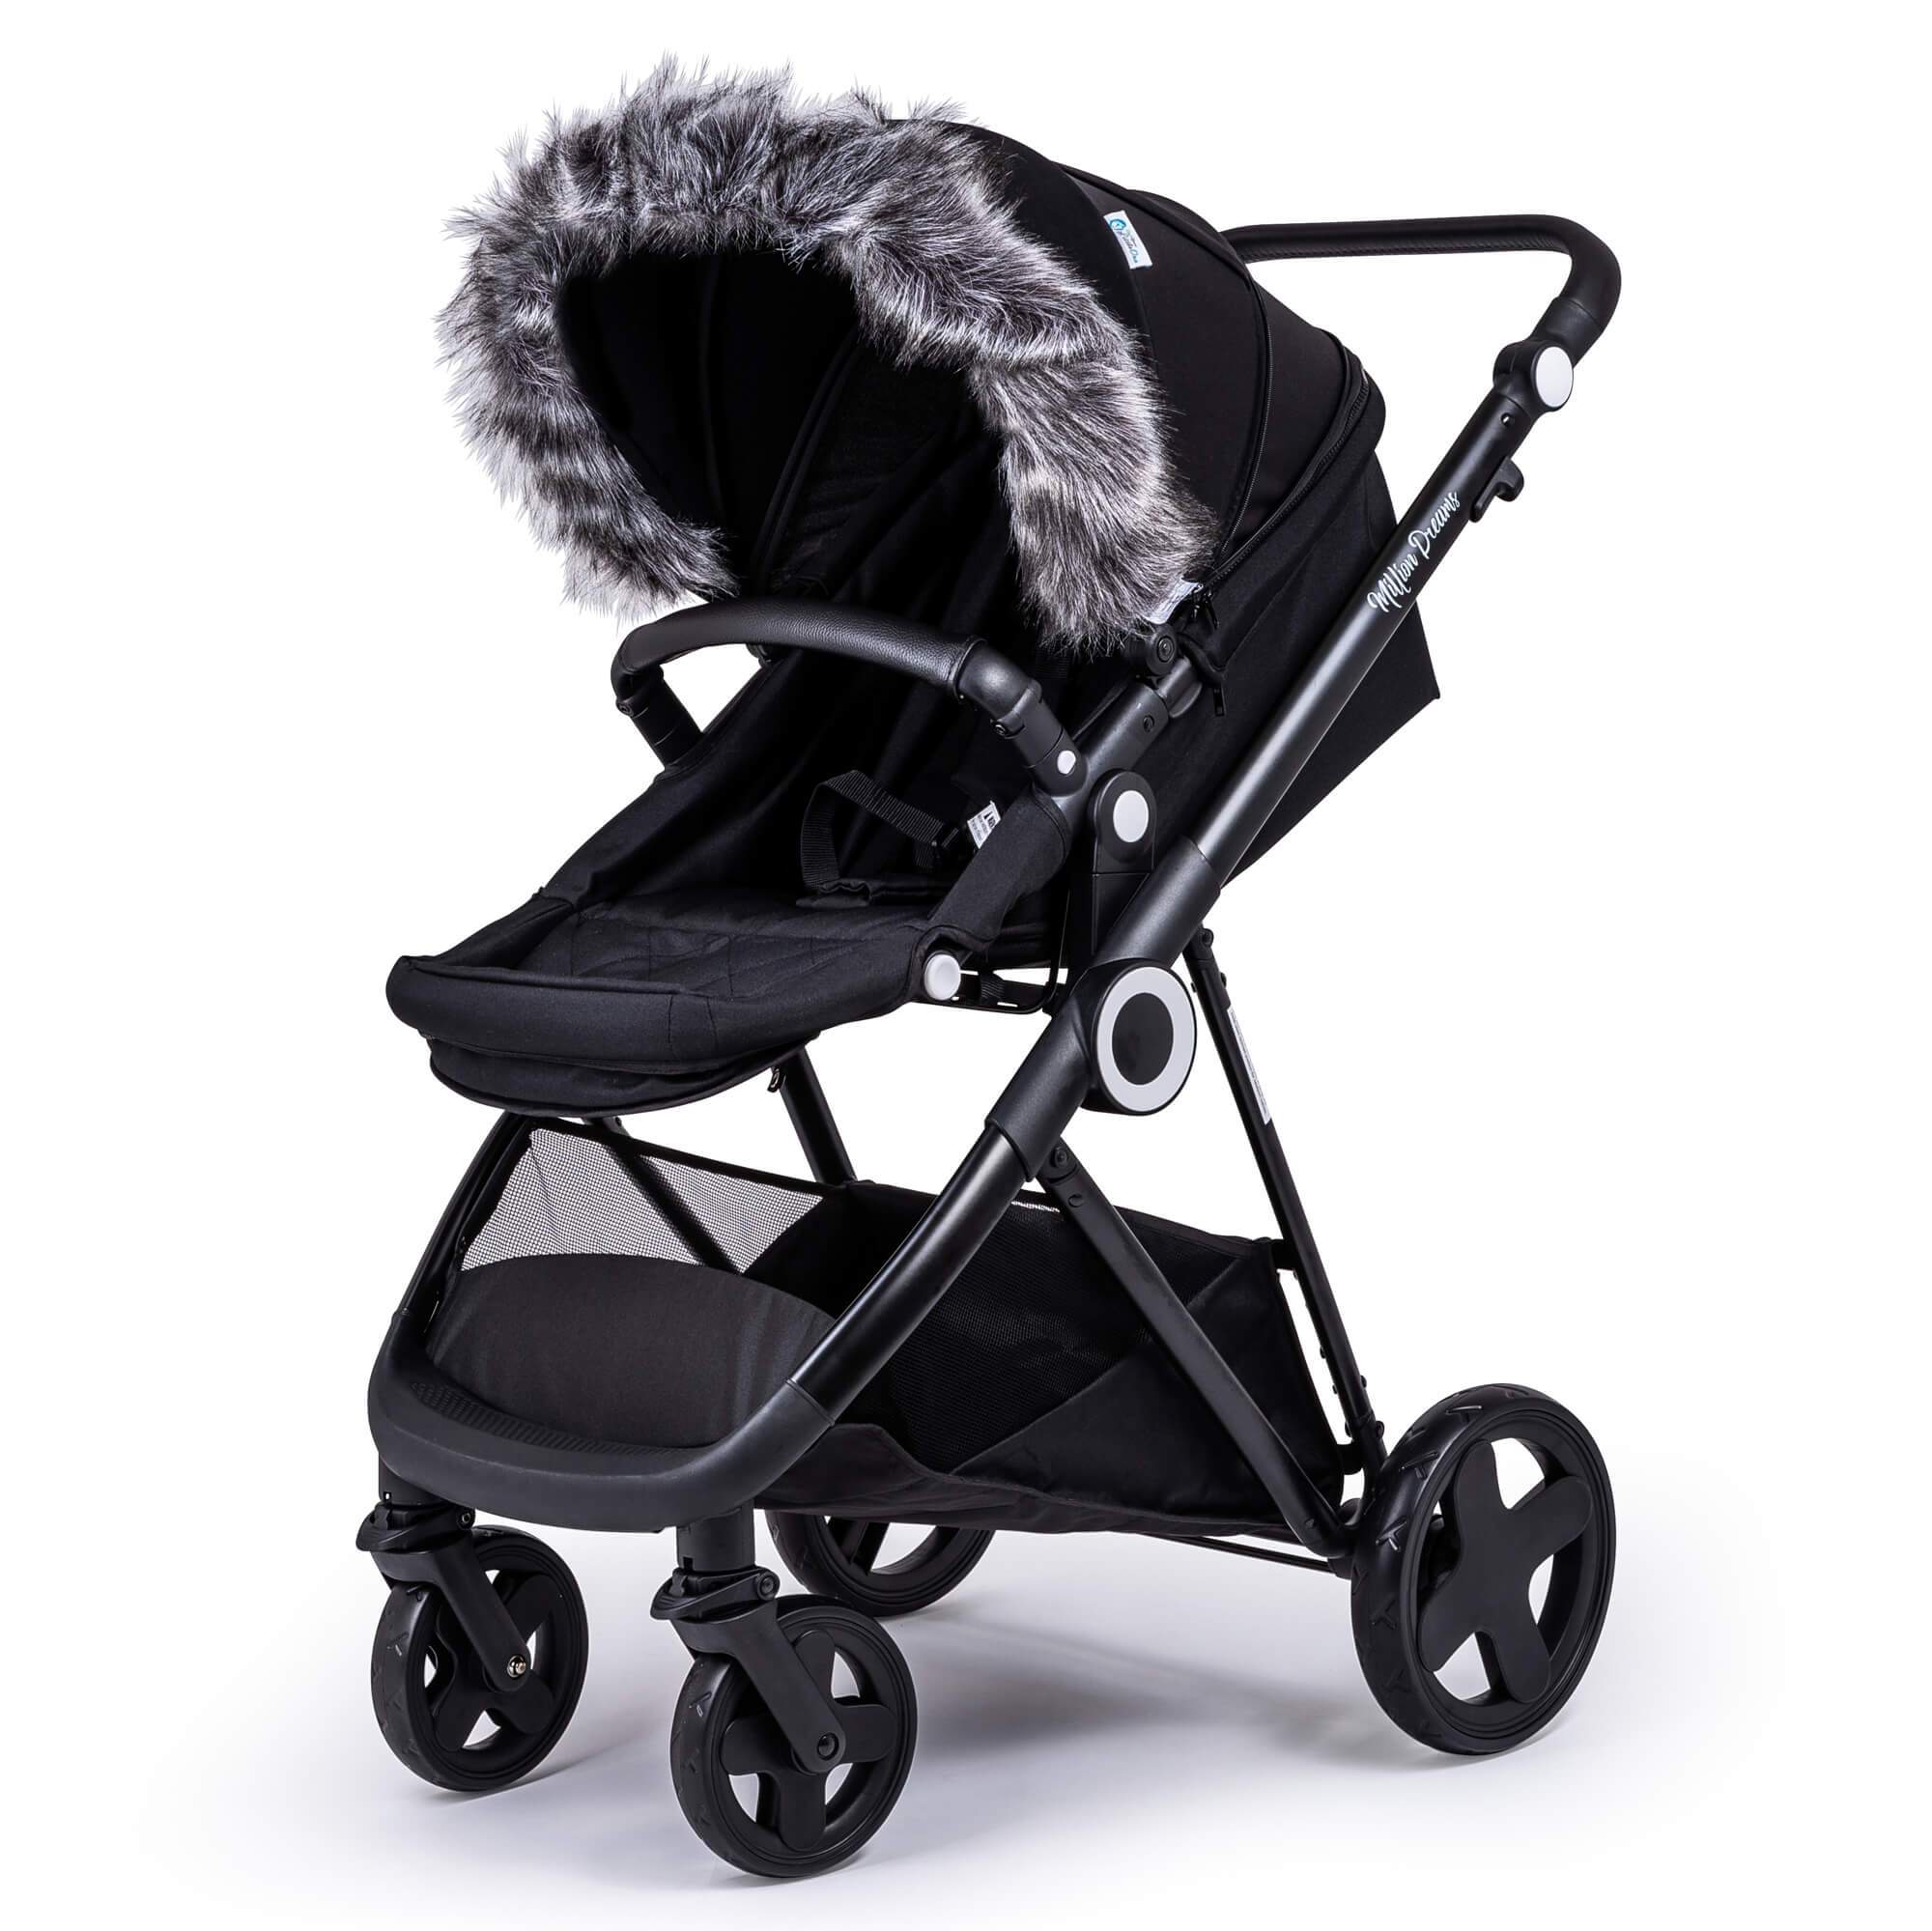 Pram Fur Hood Trim Attachment for Pushchair Compatible with BabyStyle - Dark Grey / Fits All Models | For Your Little One